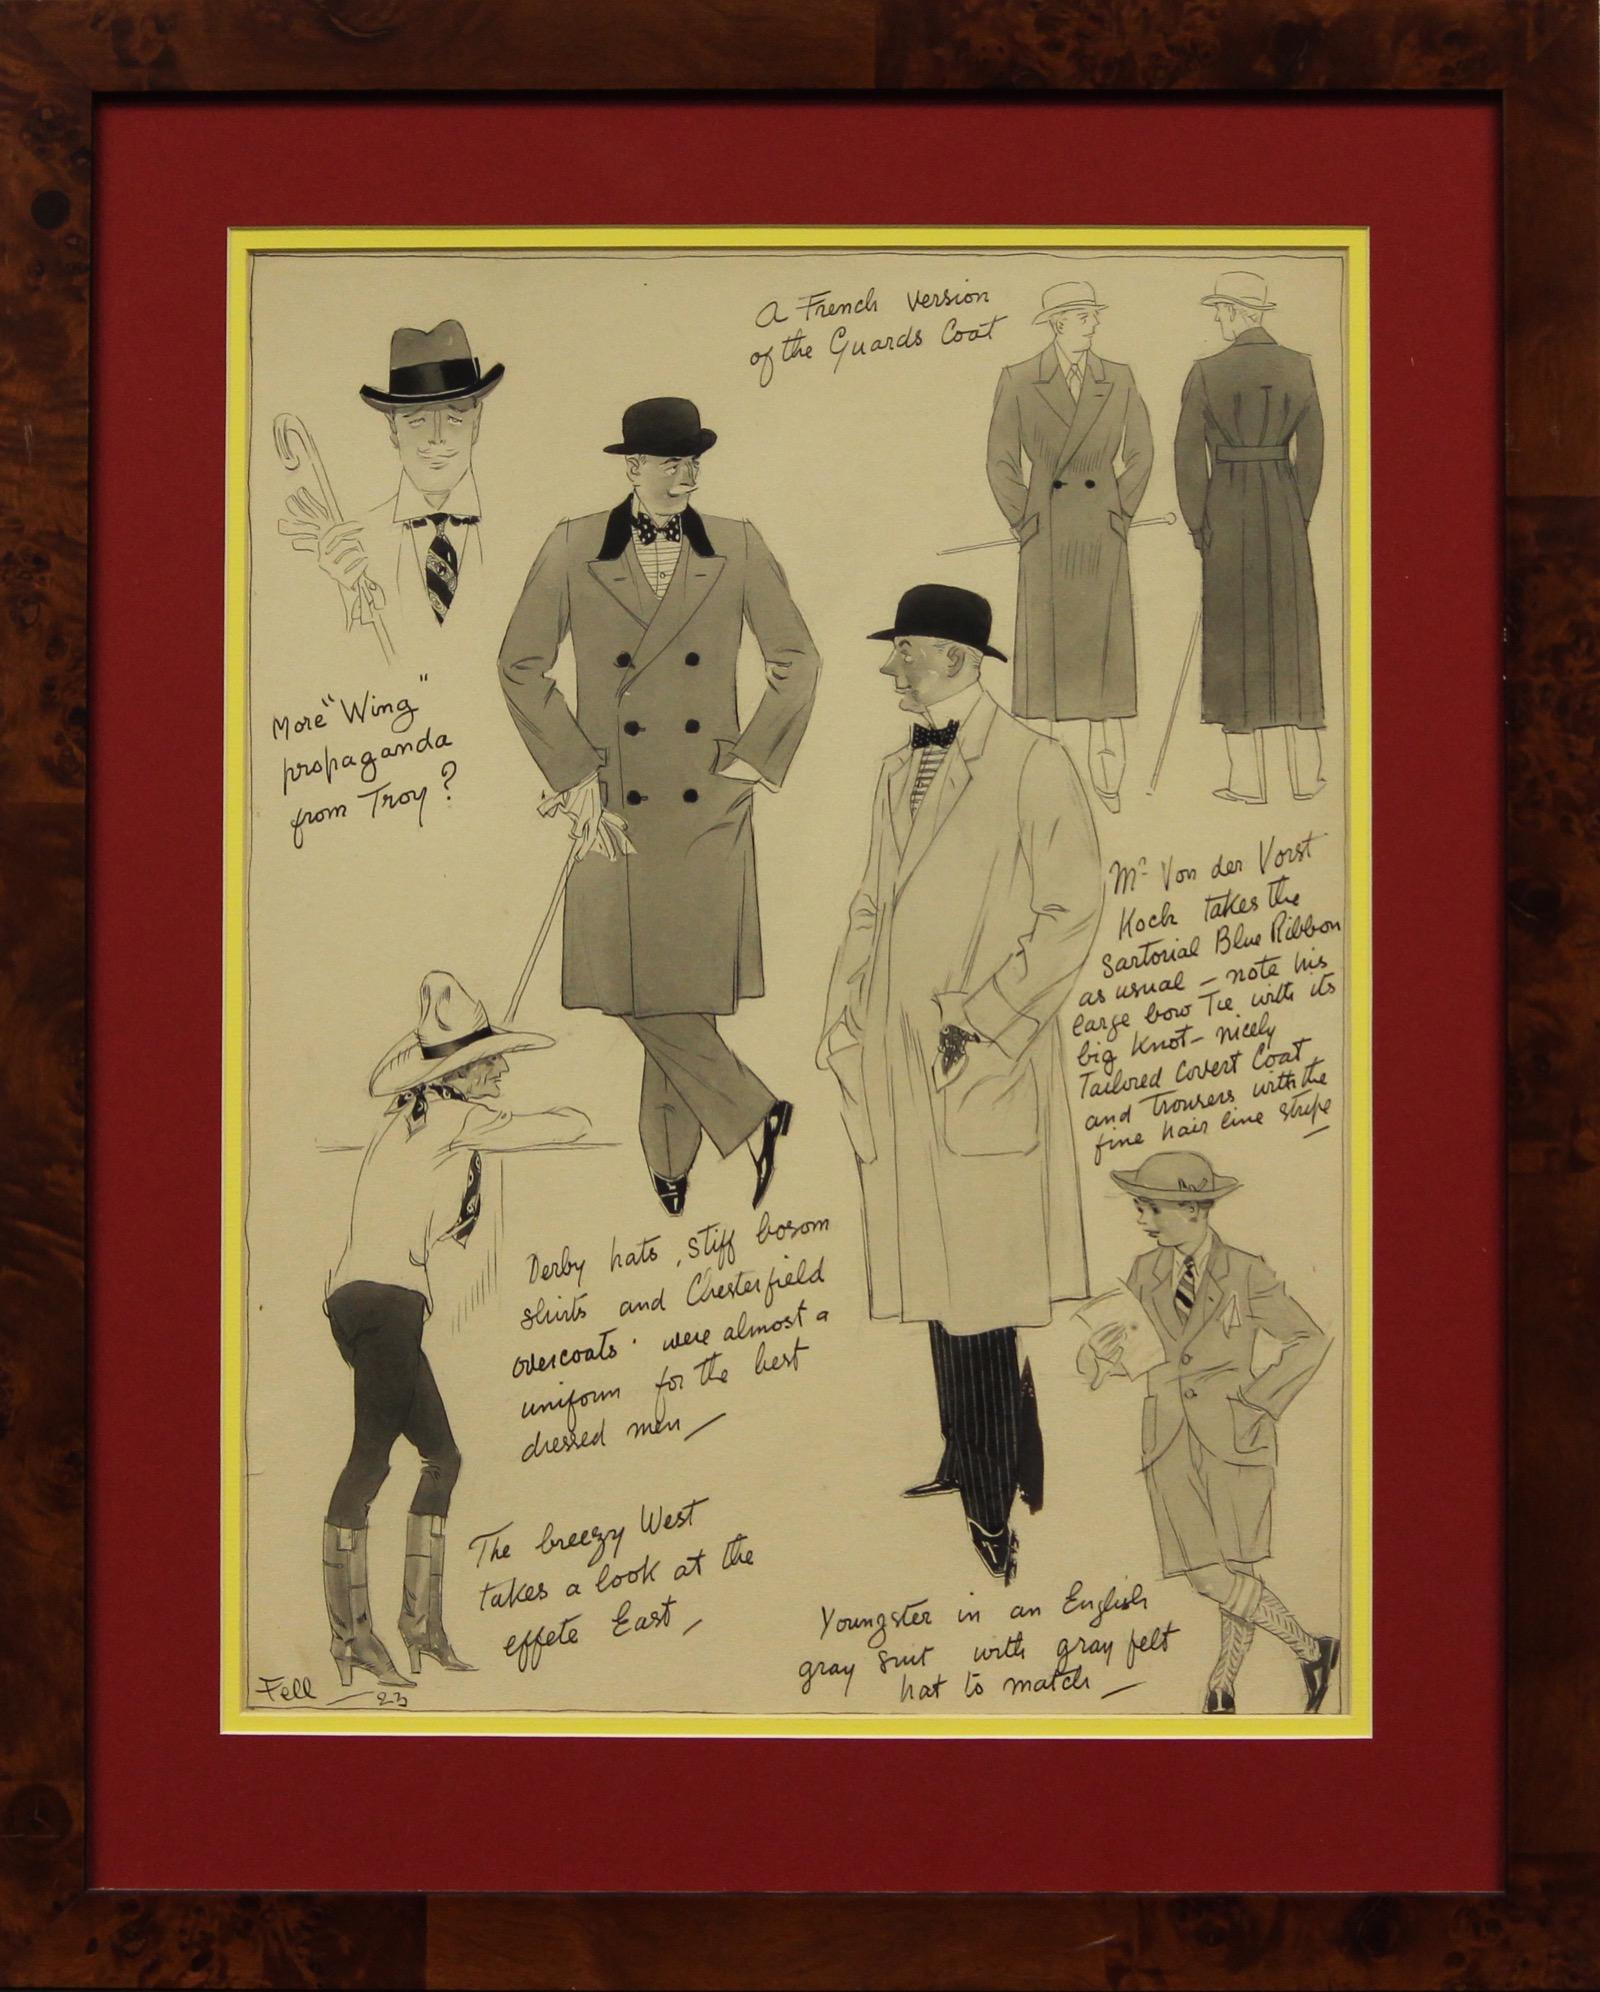 Stylish & dapper watercolour 'decoupage' vignette by 'Fell' 1923

Featuring seven English gents sporting various styles of bespoke apparel

Image Sz: 17"H x 12 3/4"W

Frame Sz: 23 1/4"H x 18 3/4"W

(4/14/1880- 11/1972)
Herbert Fell Sharp was a